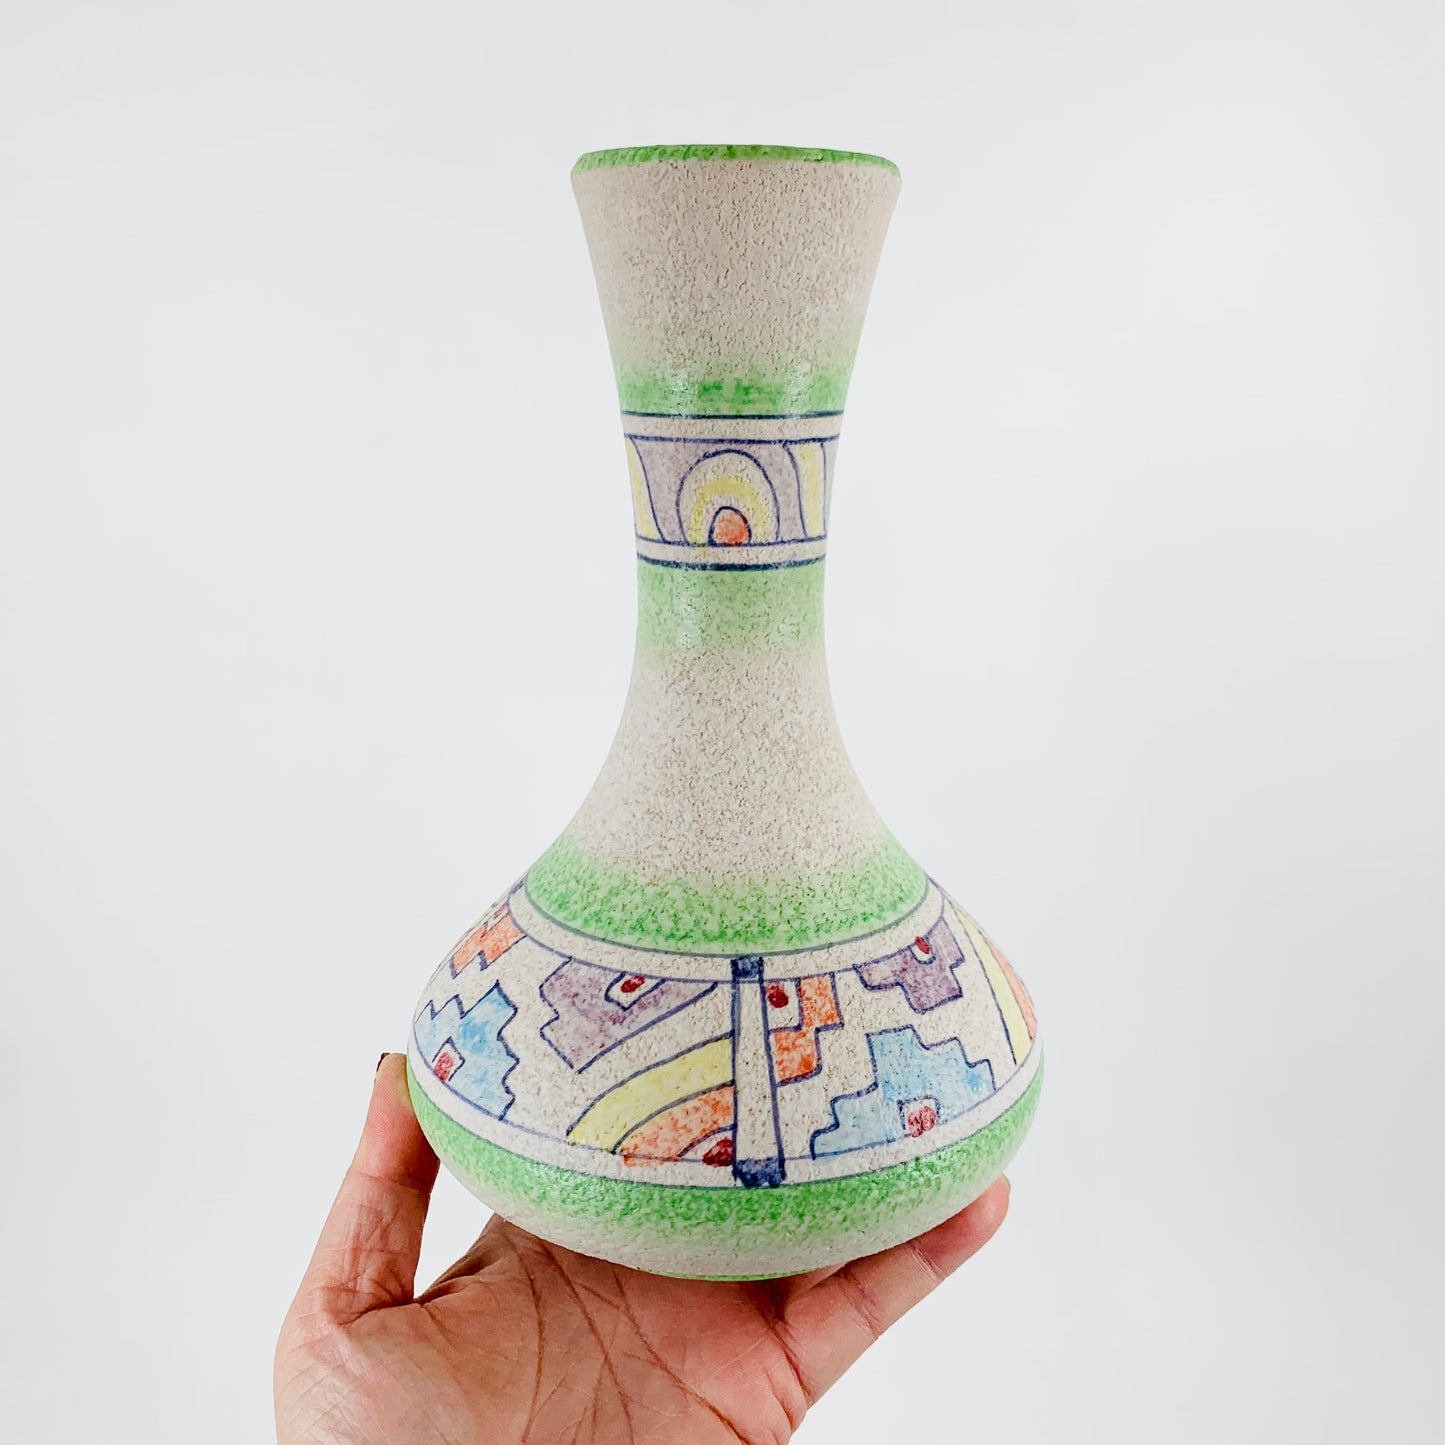 MCM Deruta hand-painted geometric pottery vase by Lapid